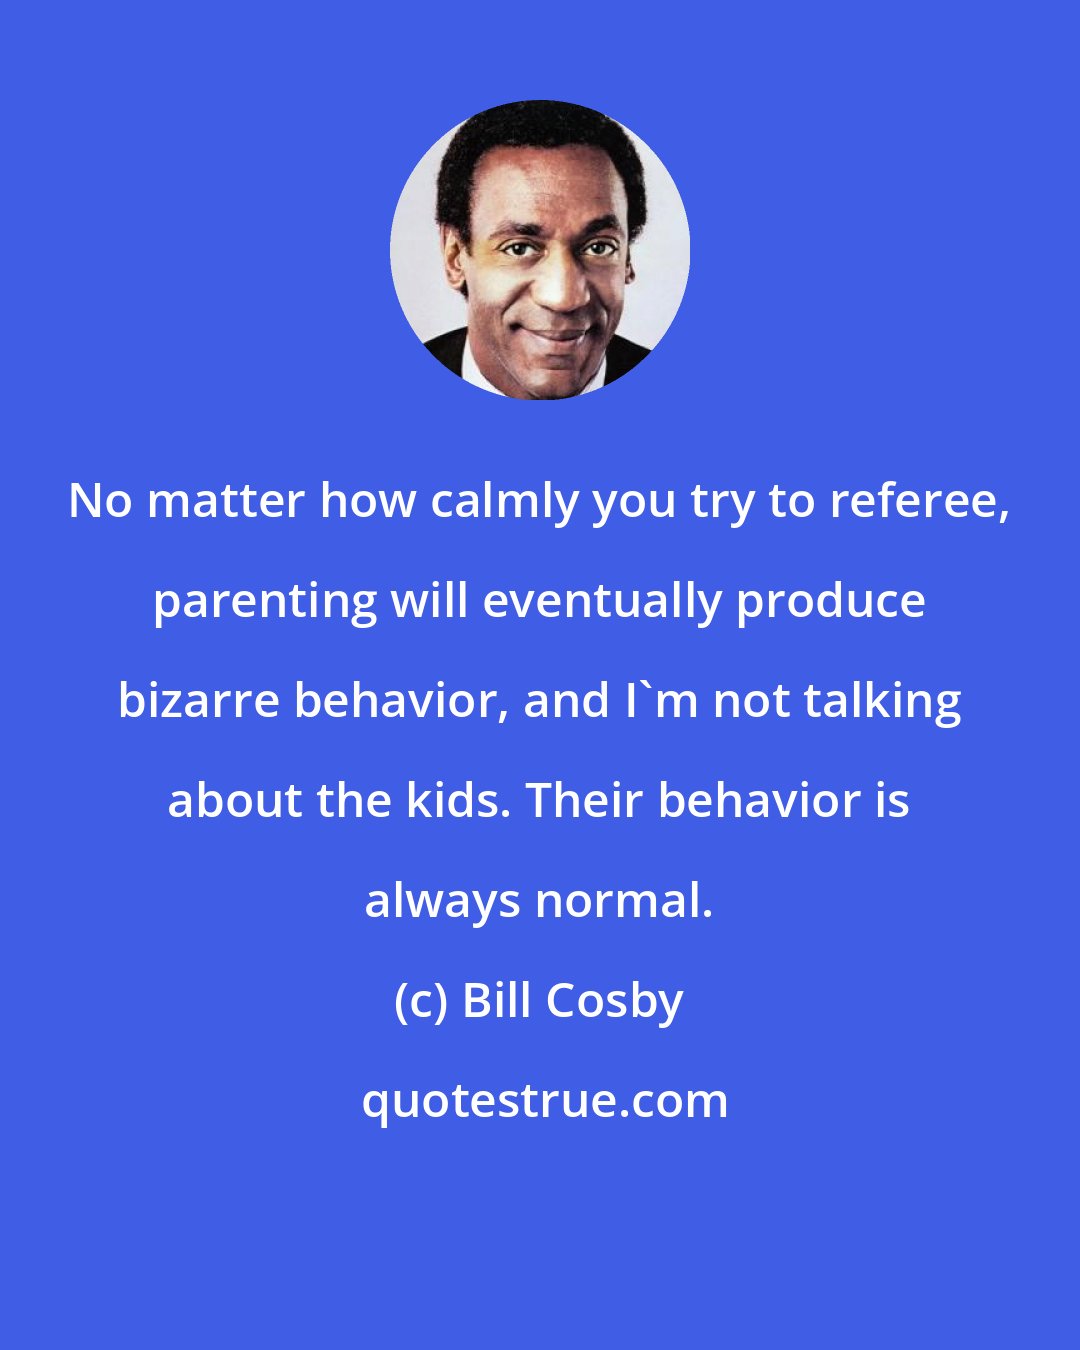 Bill Cosby: No matter how calmly you try to referee, parenting will eventually produce bizarre behavior, and I'm not talking about the kids. Their behavior is always normal.